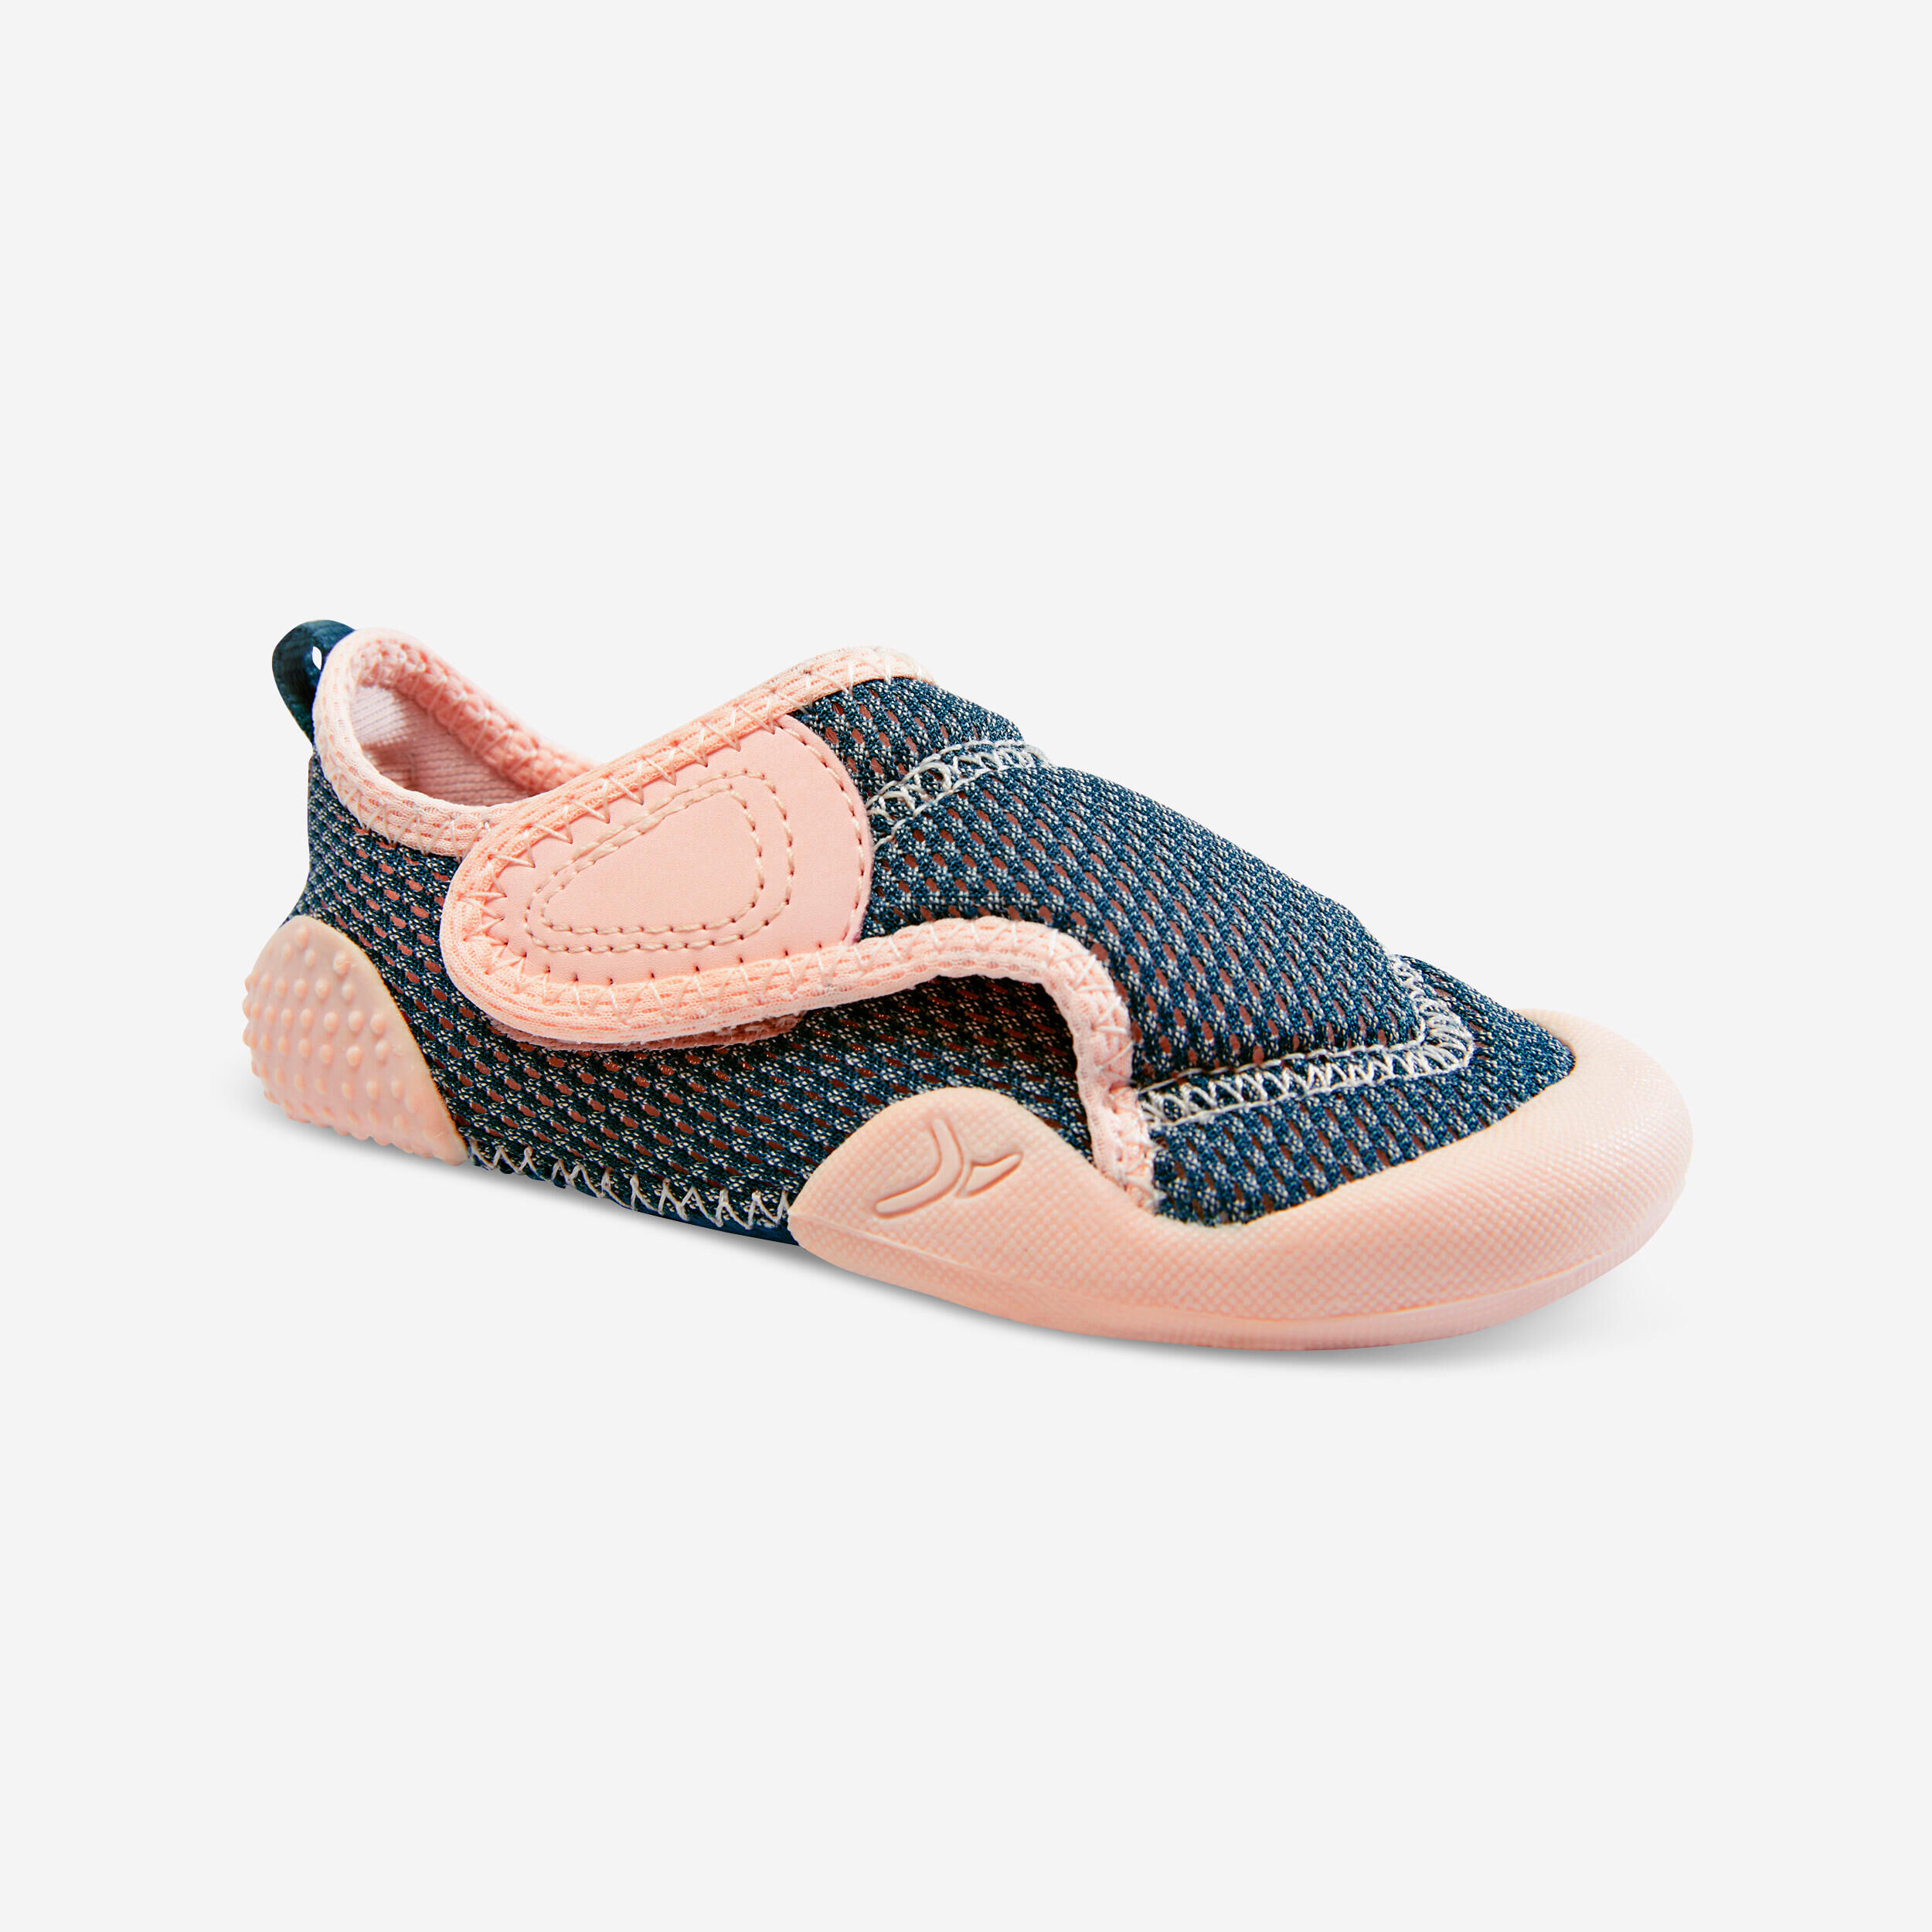 DOMYOS Kids' Non-Slip and Breathable Bootees - Blue/Pink